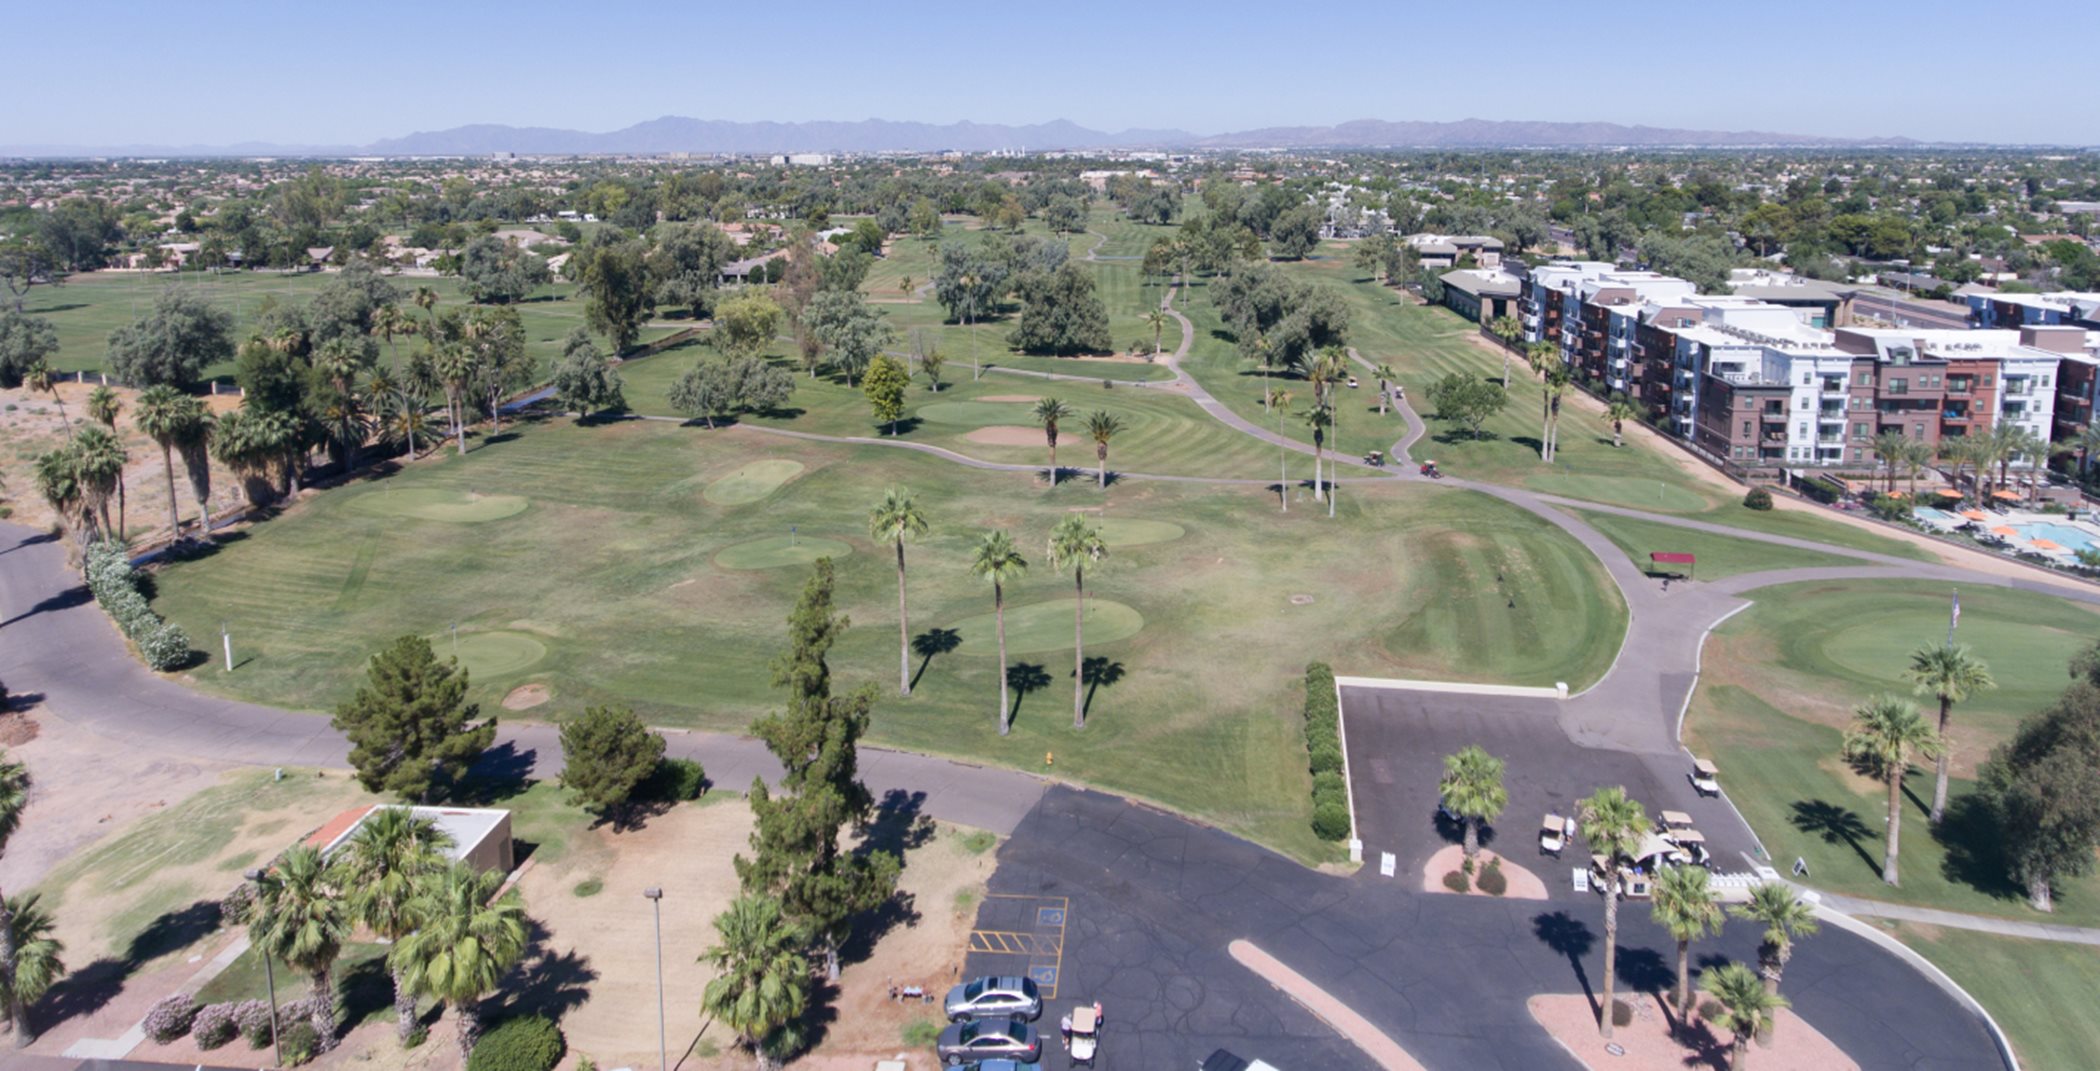 Aerial view of a desert golf course with lots of palm trees